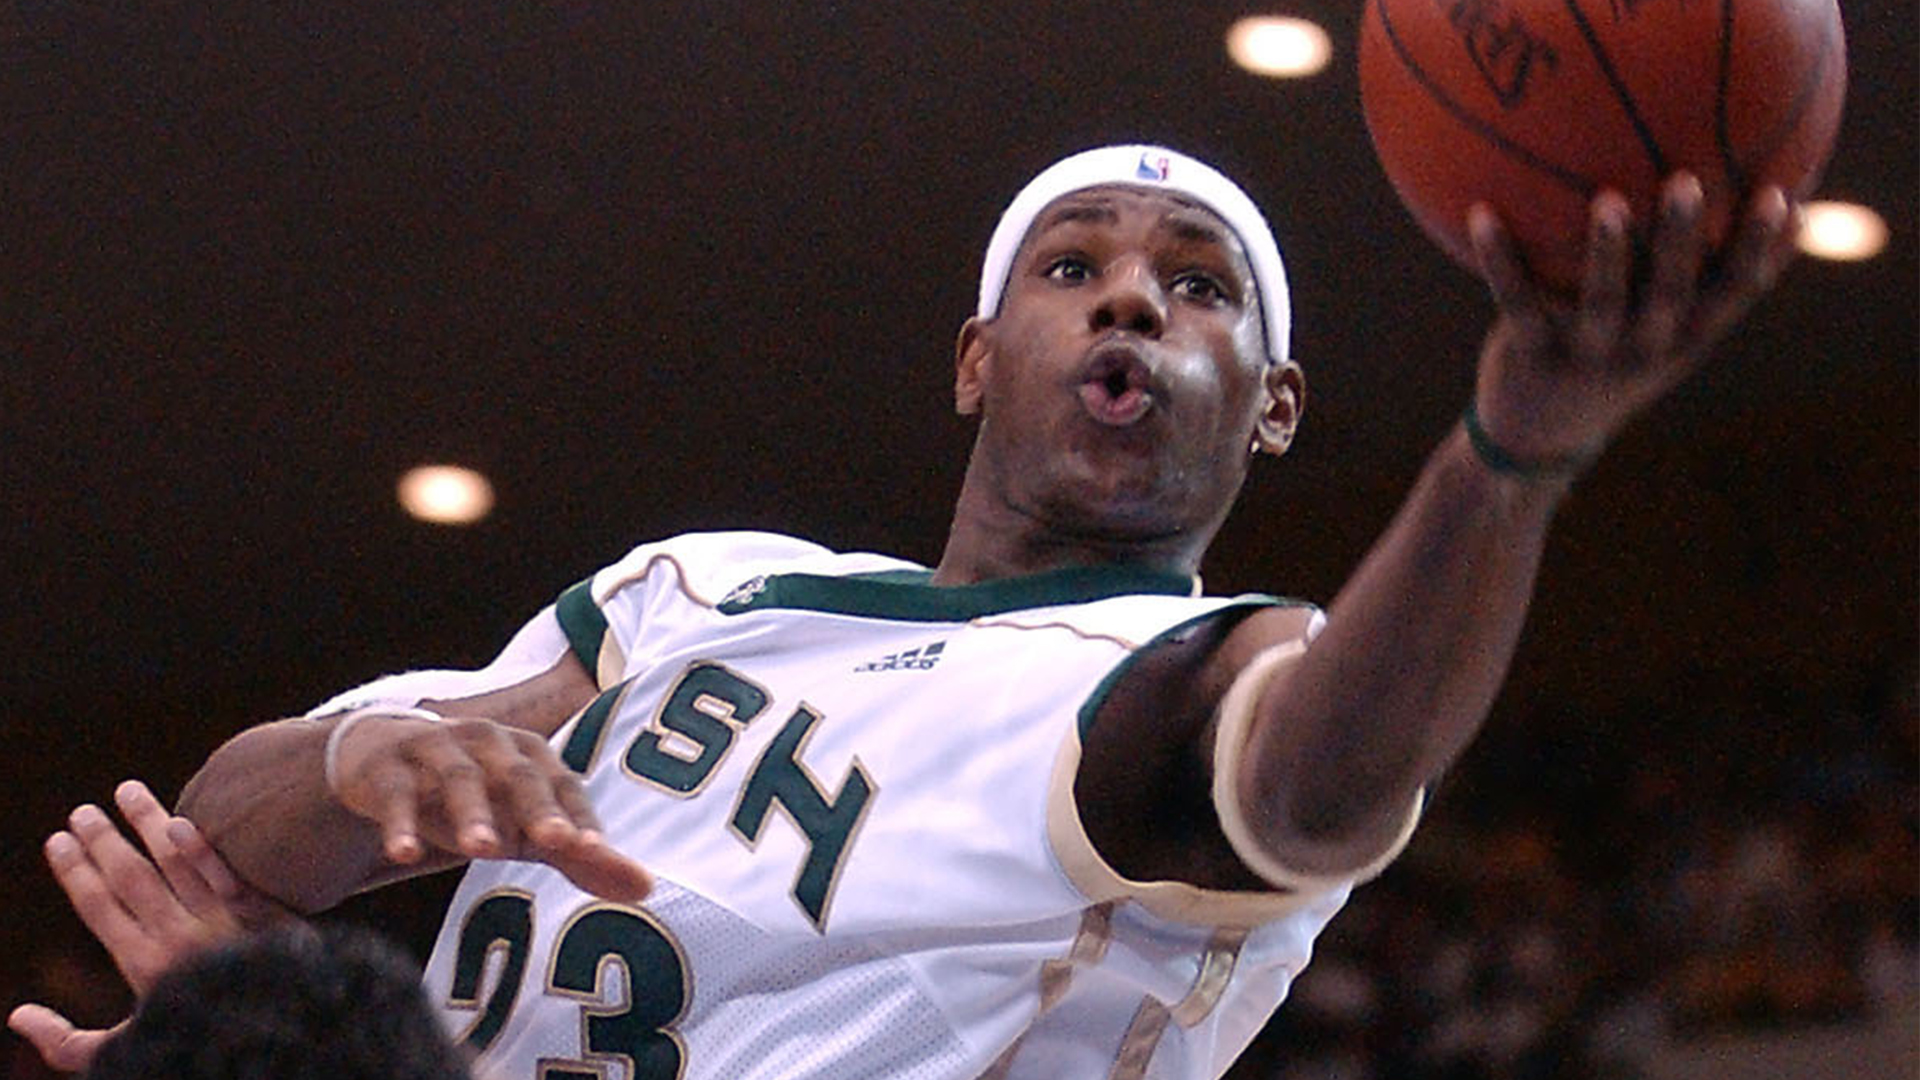 LeBron James' High School Jersey Estimated To Be Auctioned For Up To $600K